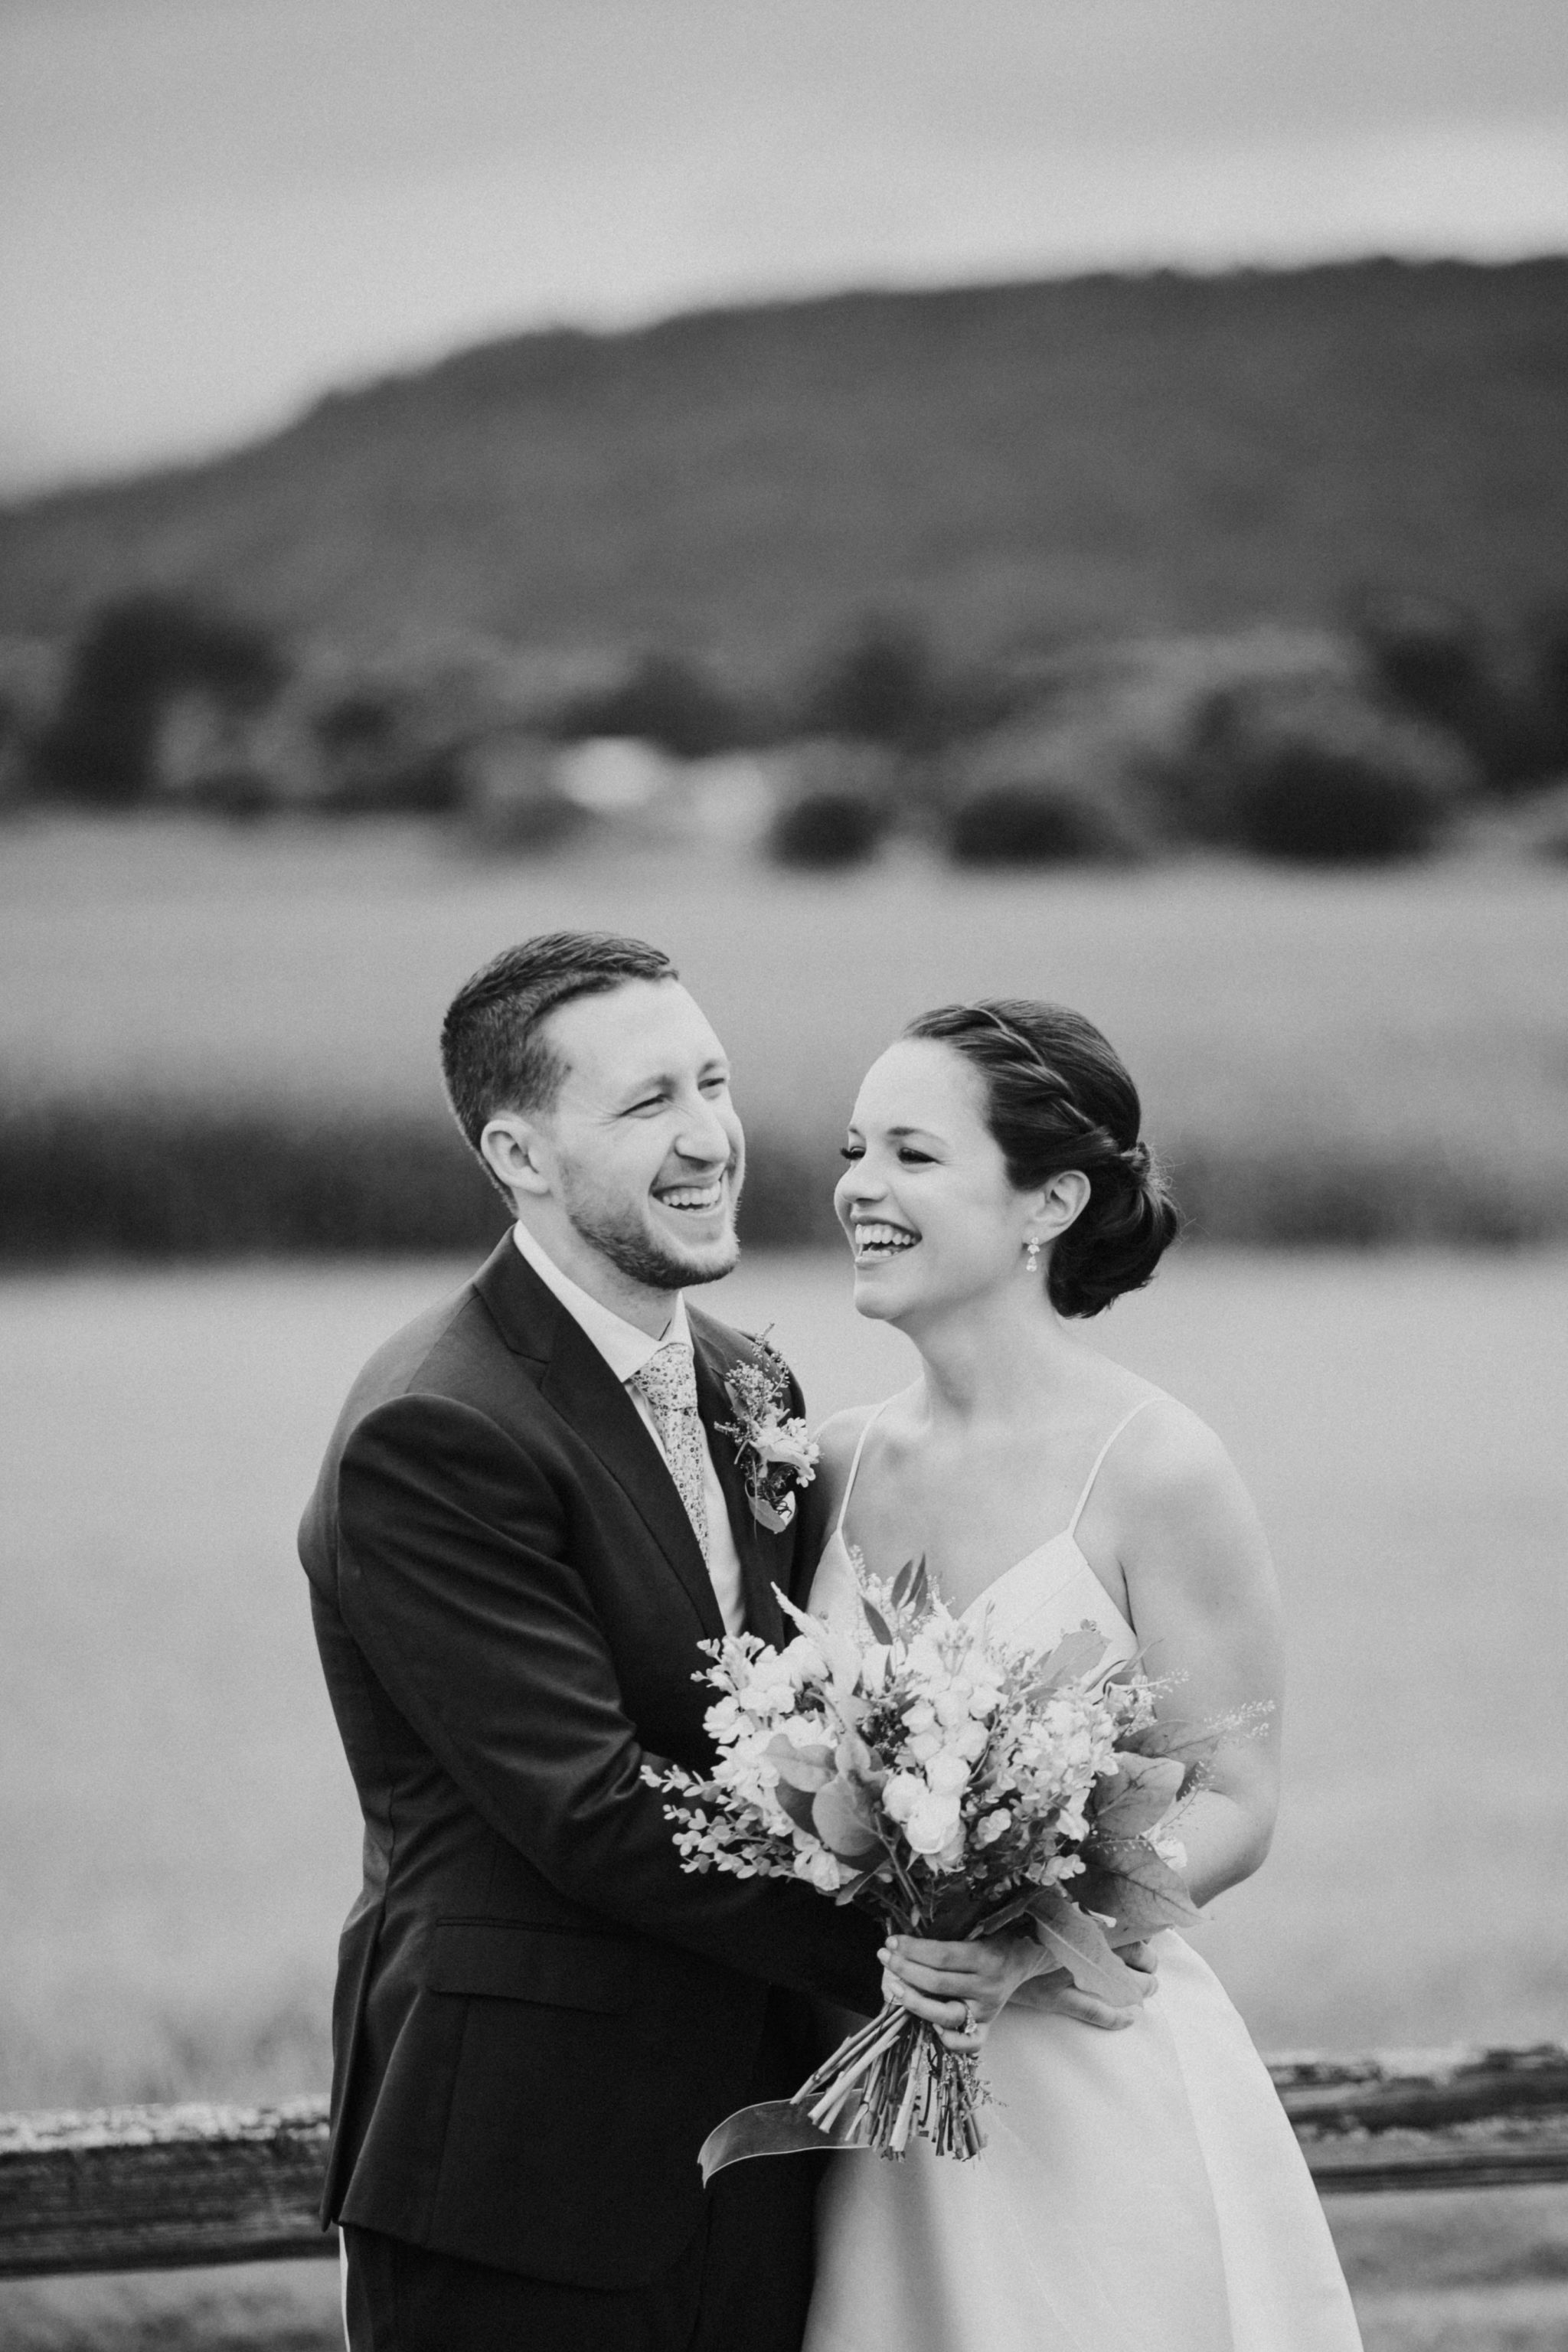 Happy Couple on the Wedding Day | © Amy Donohue Photography